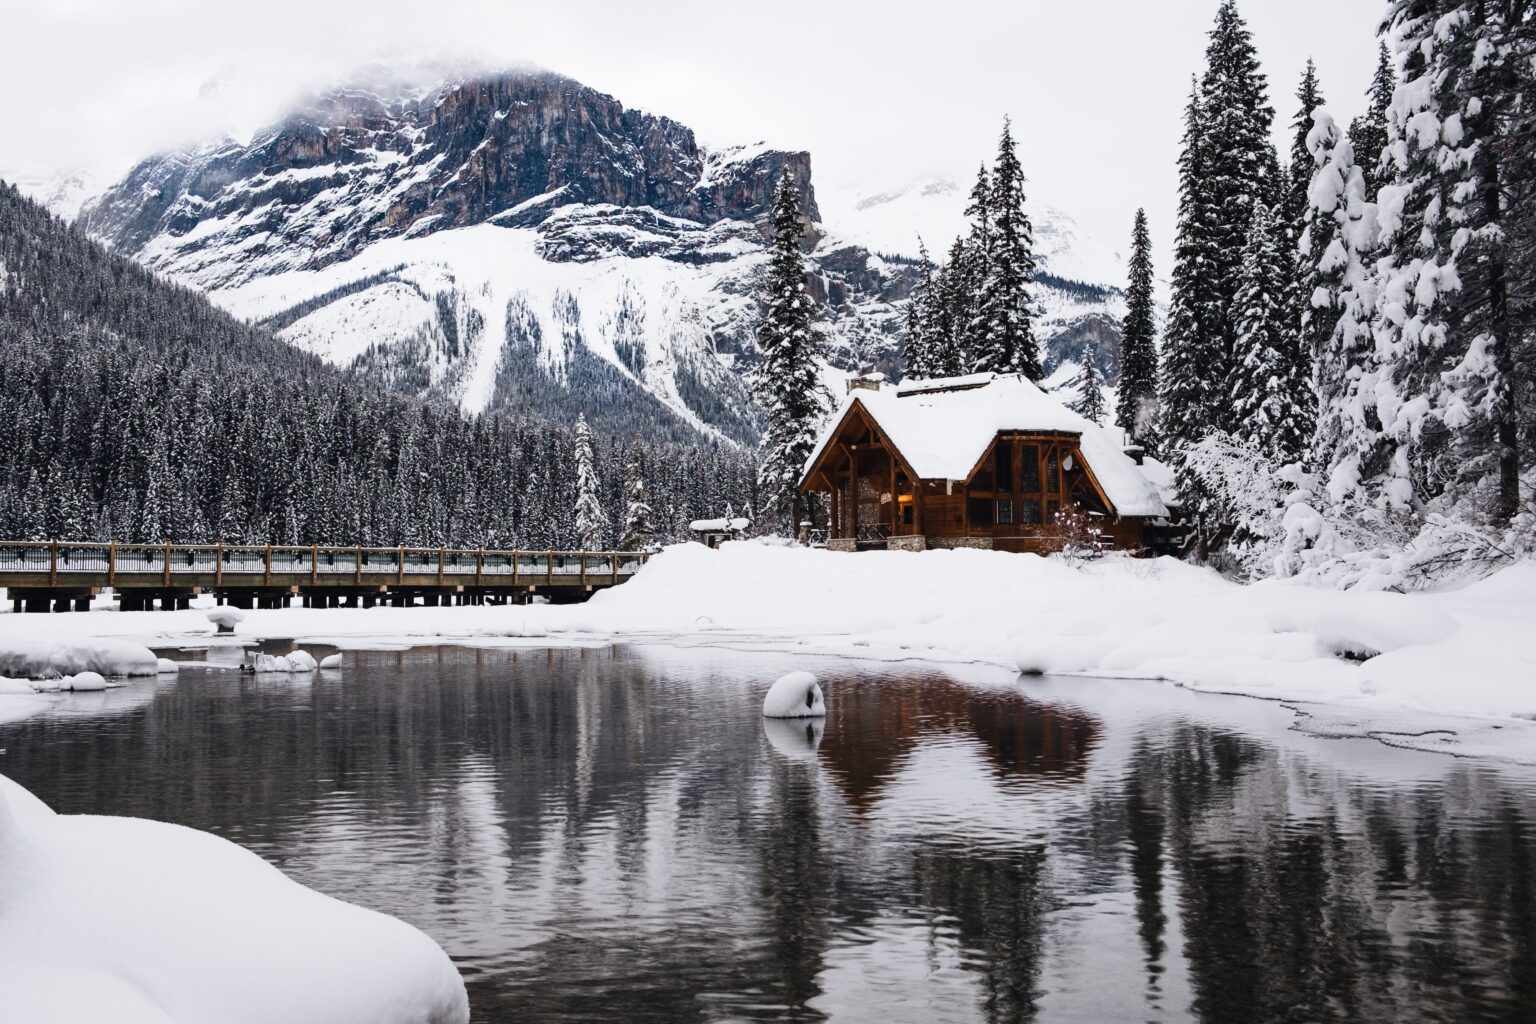 A small wooden house covered with snow near the Emerald Lake in Canada in winter